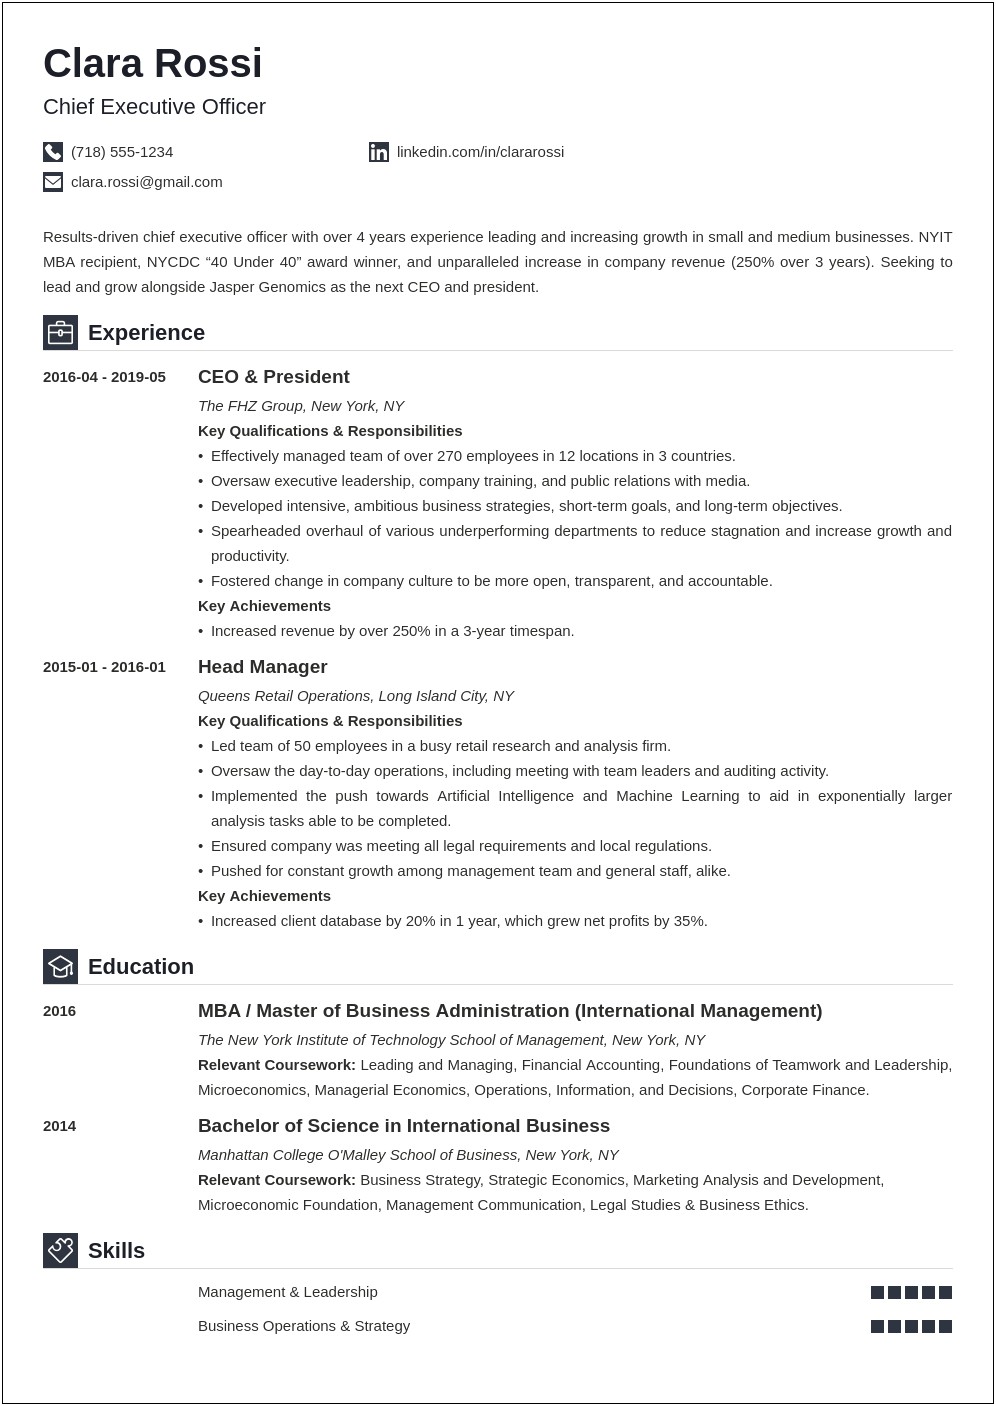 The Best Resume Ever Written By A Ceo